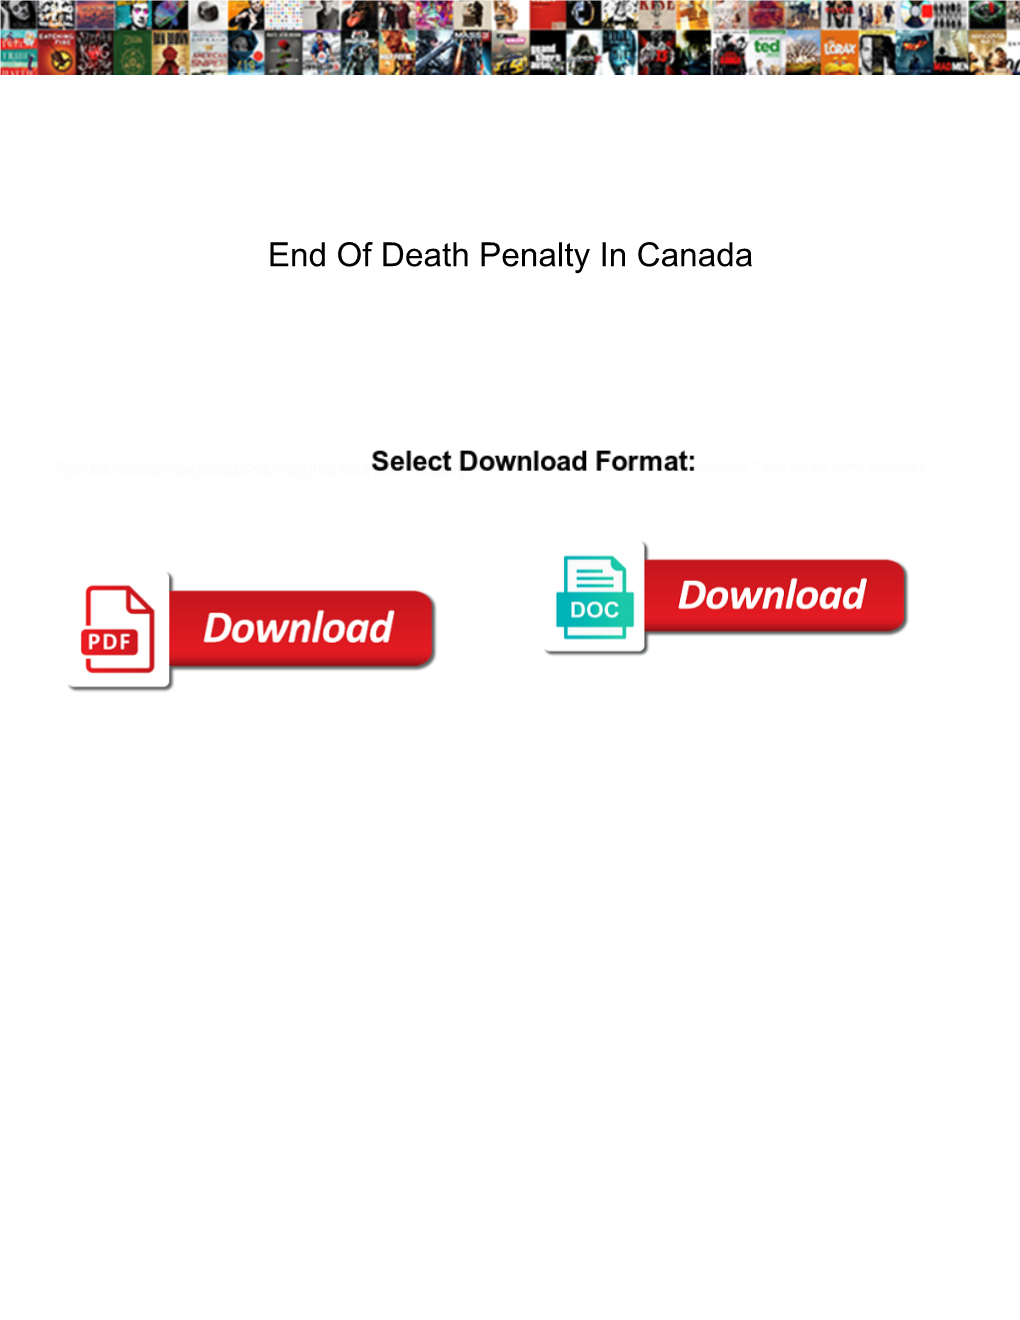 End of Death Penalty in Canada